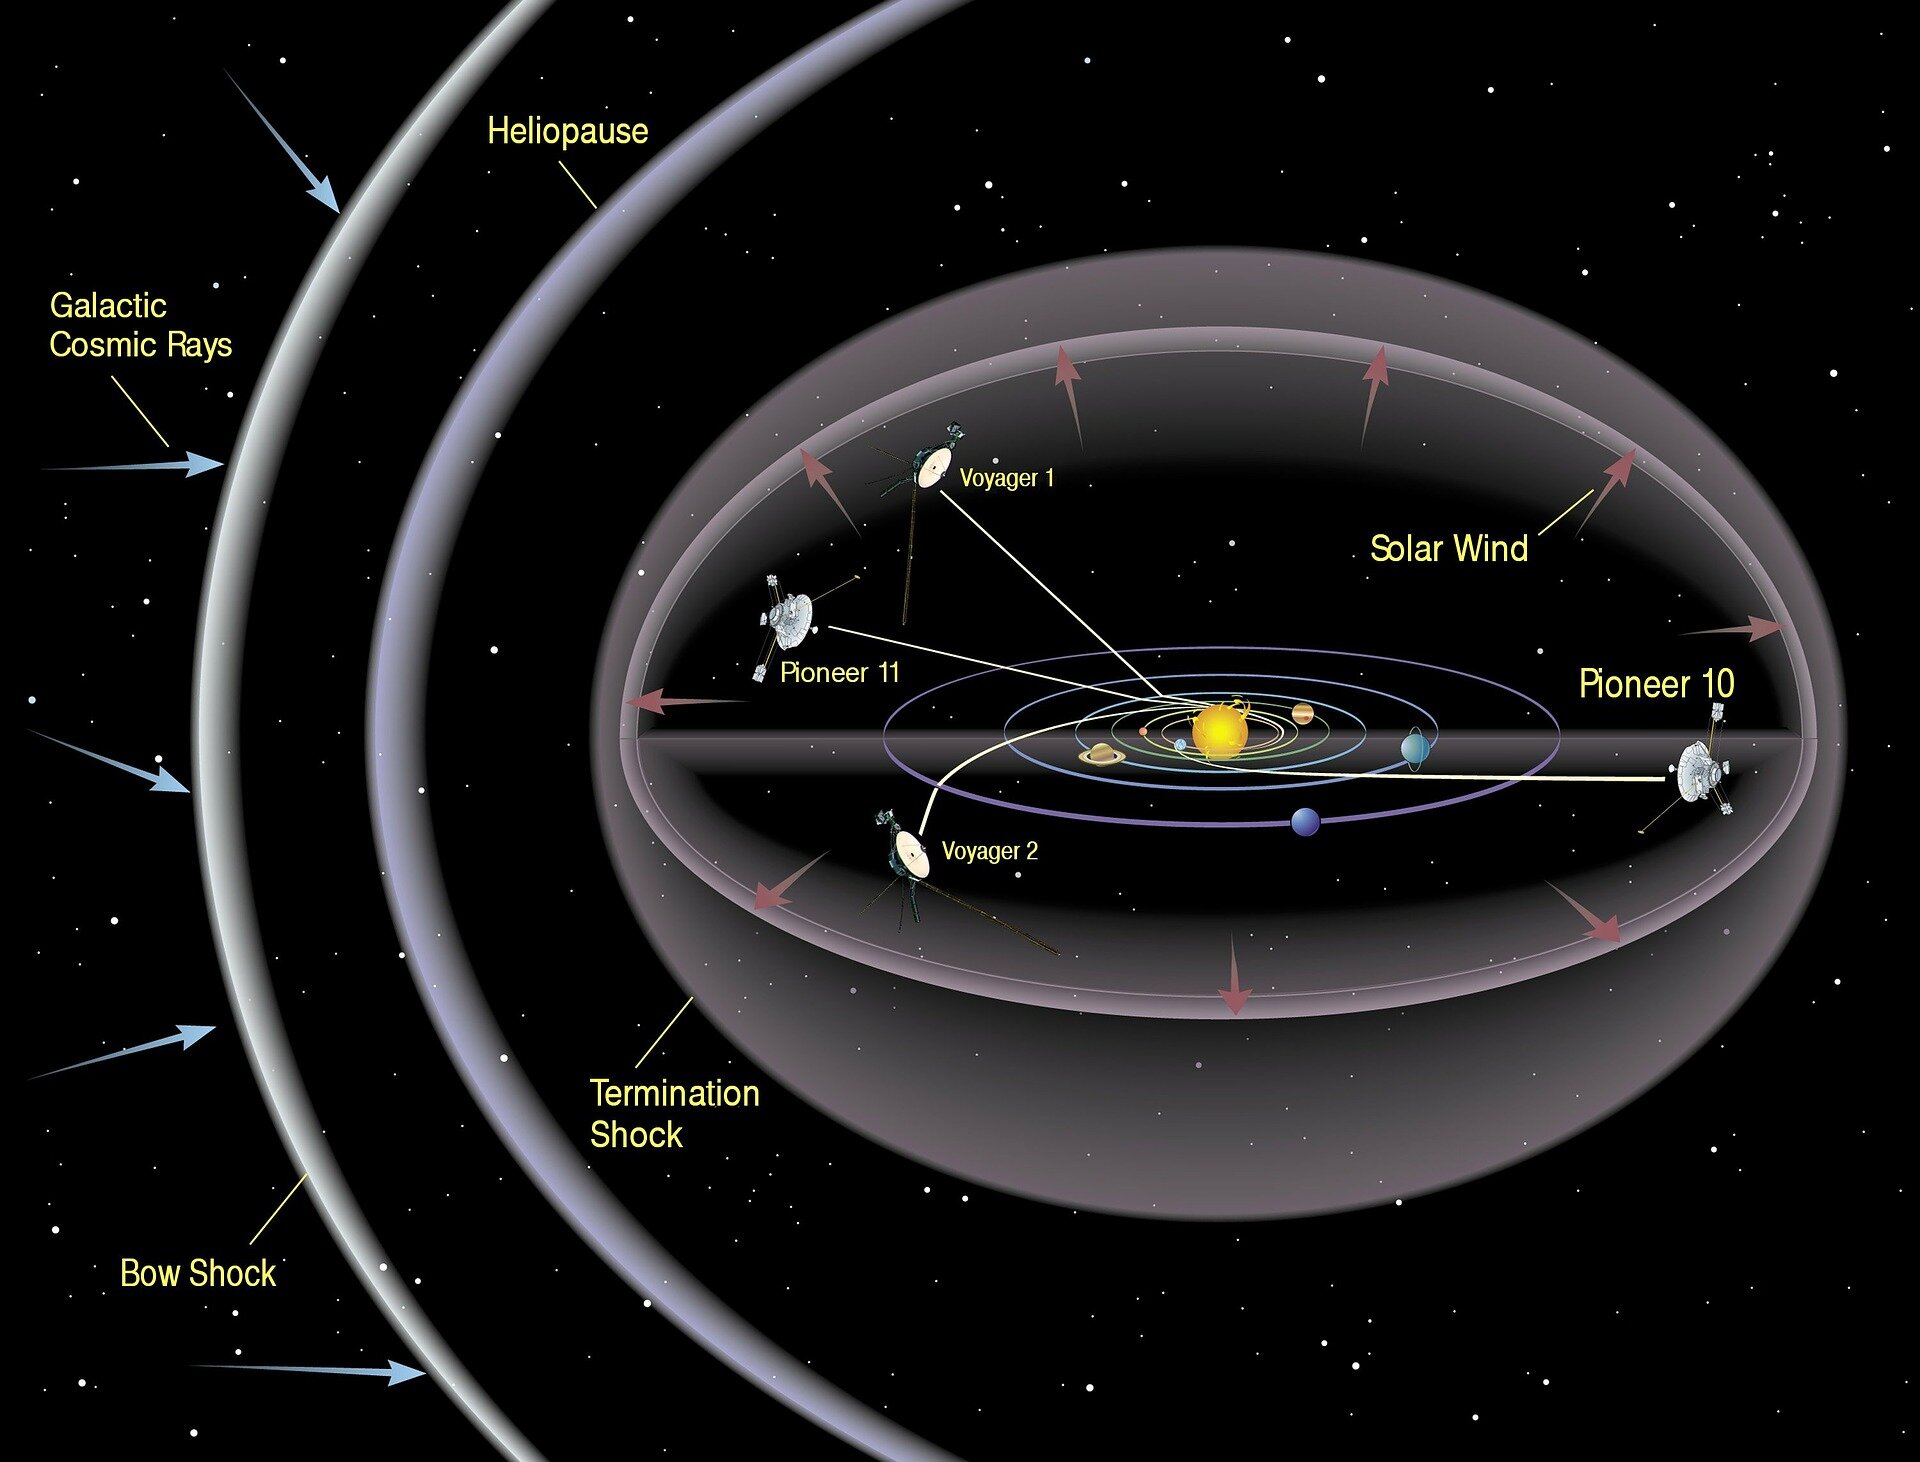 In the emptiness of space, Voyager 1 detects plasma 'hum'